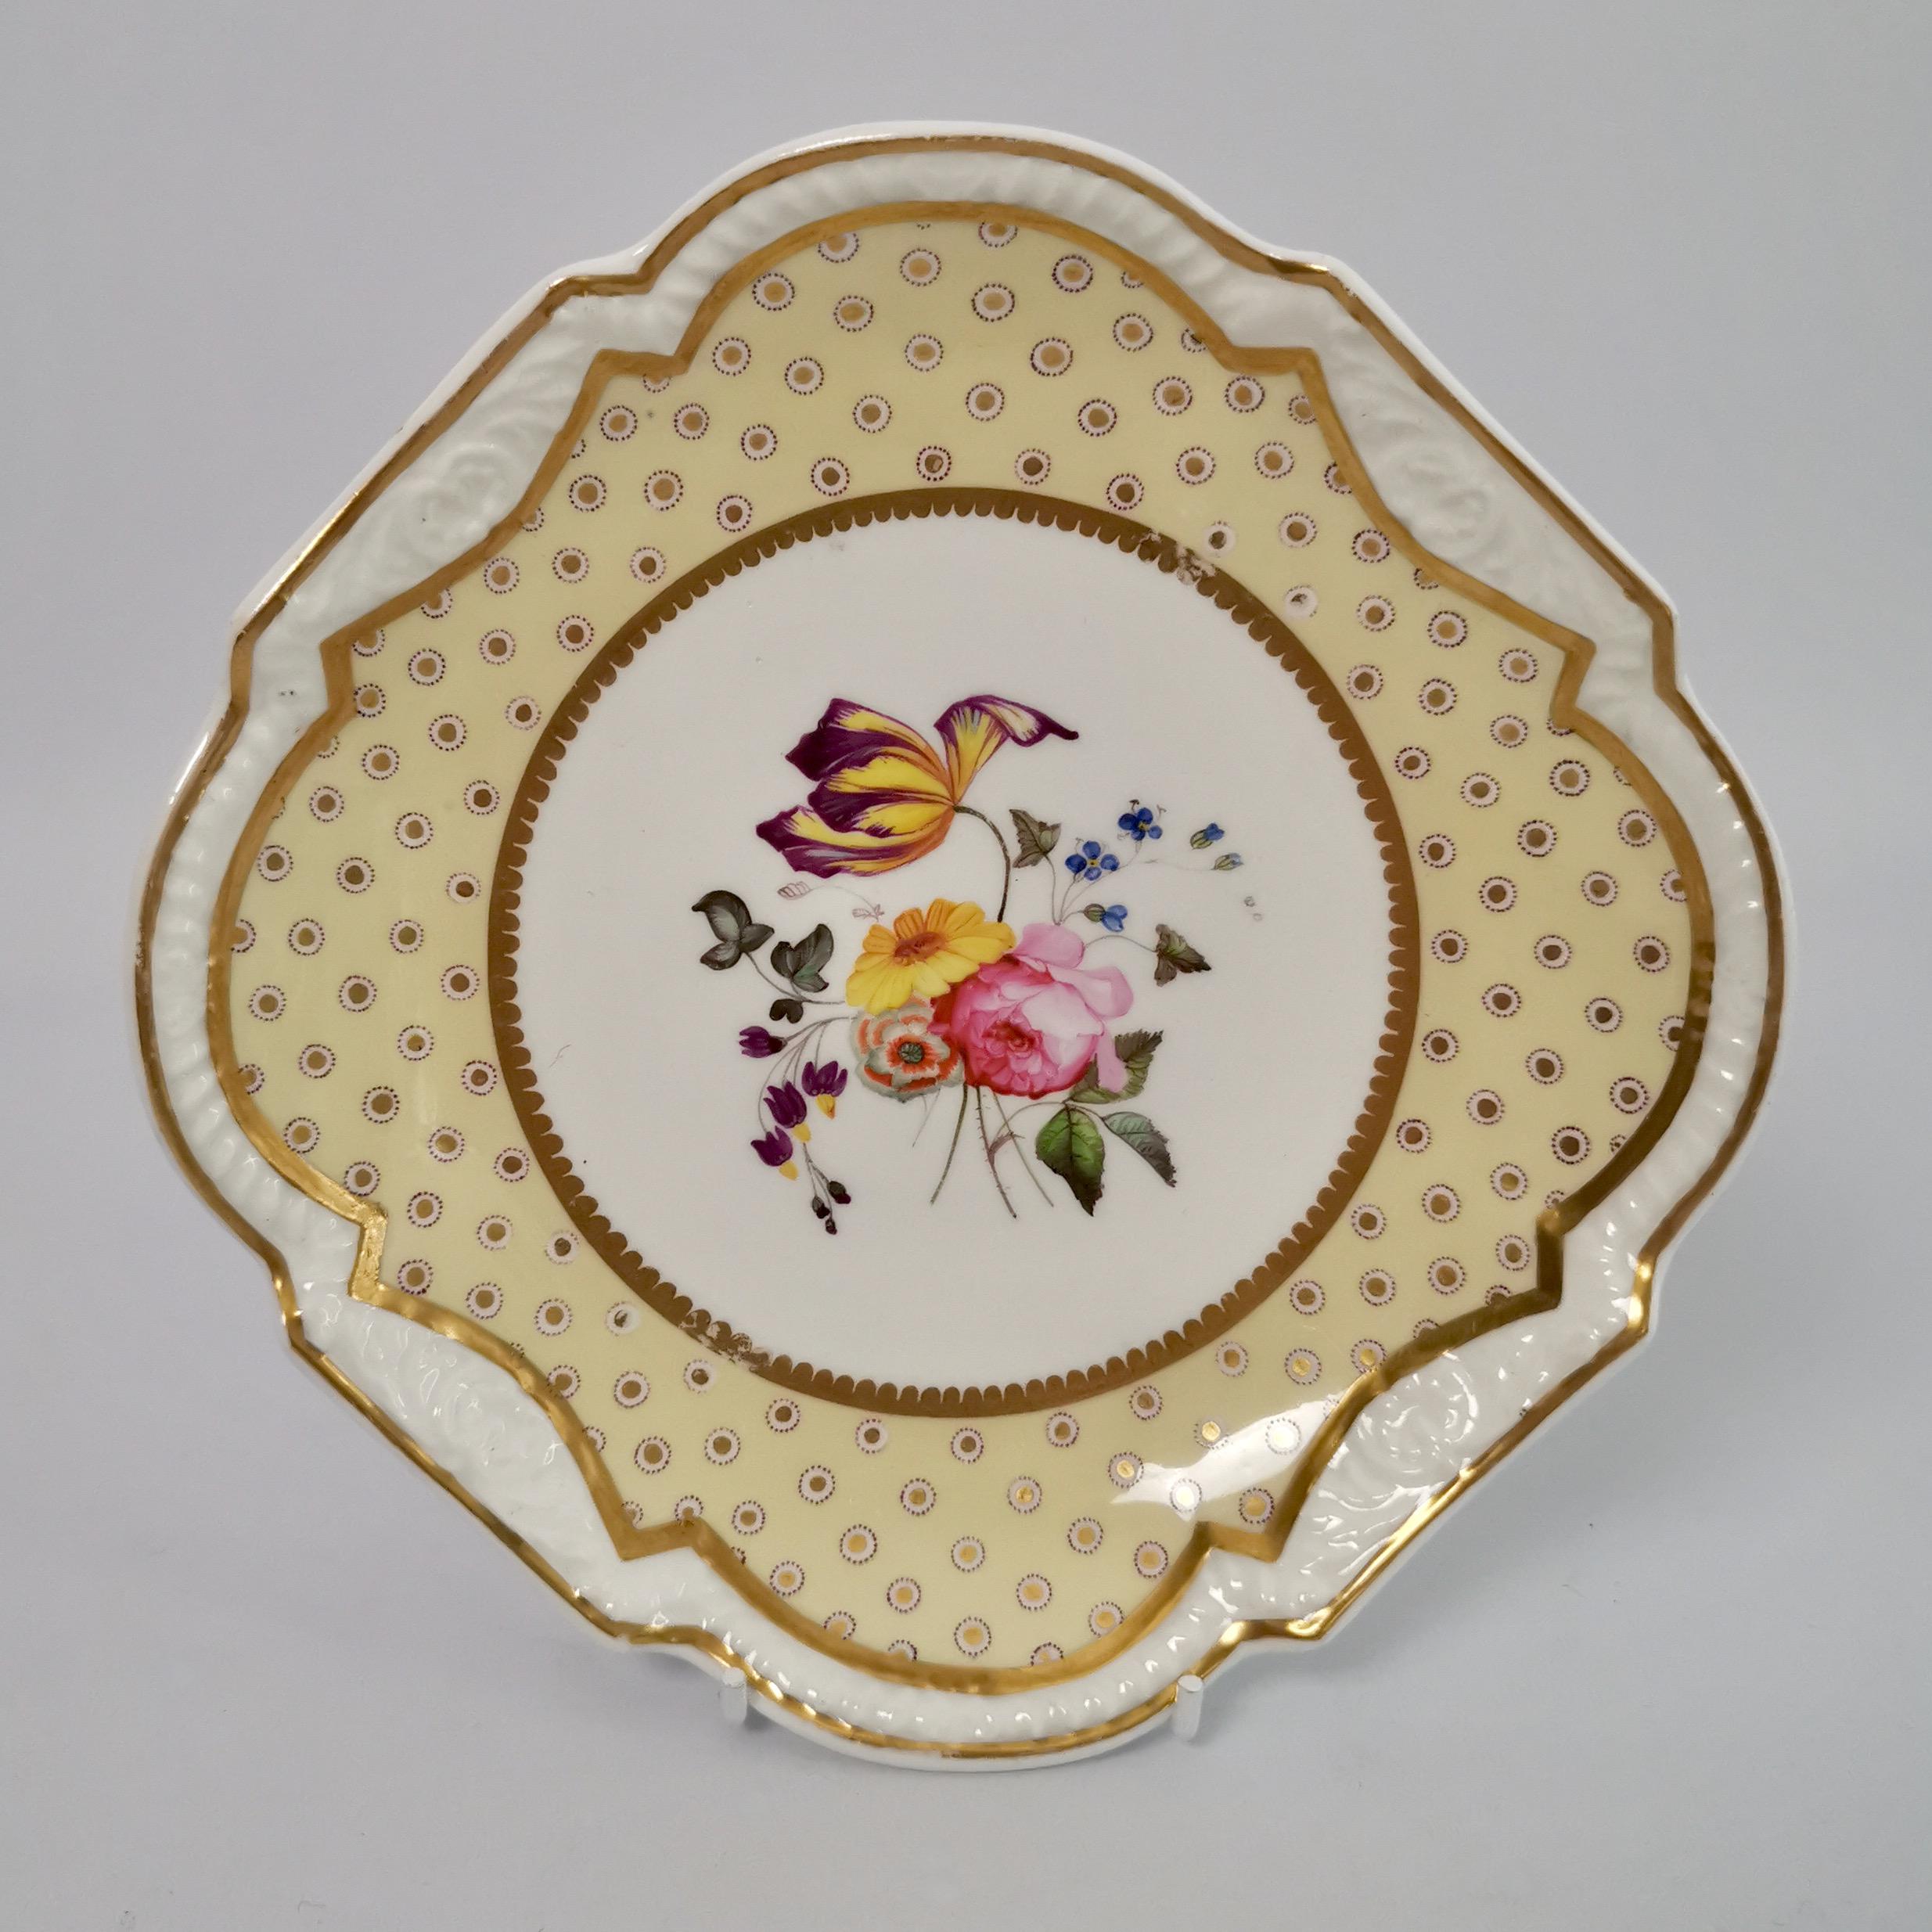 Hand-Painted Spode Felspar Floral Dessert Service, Yellow, Butterfly Handles, circa 1822 For Sale